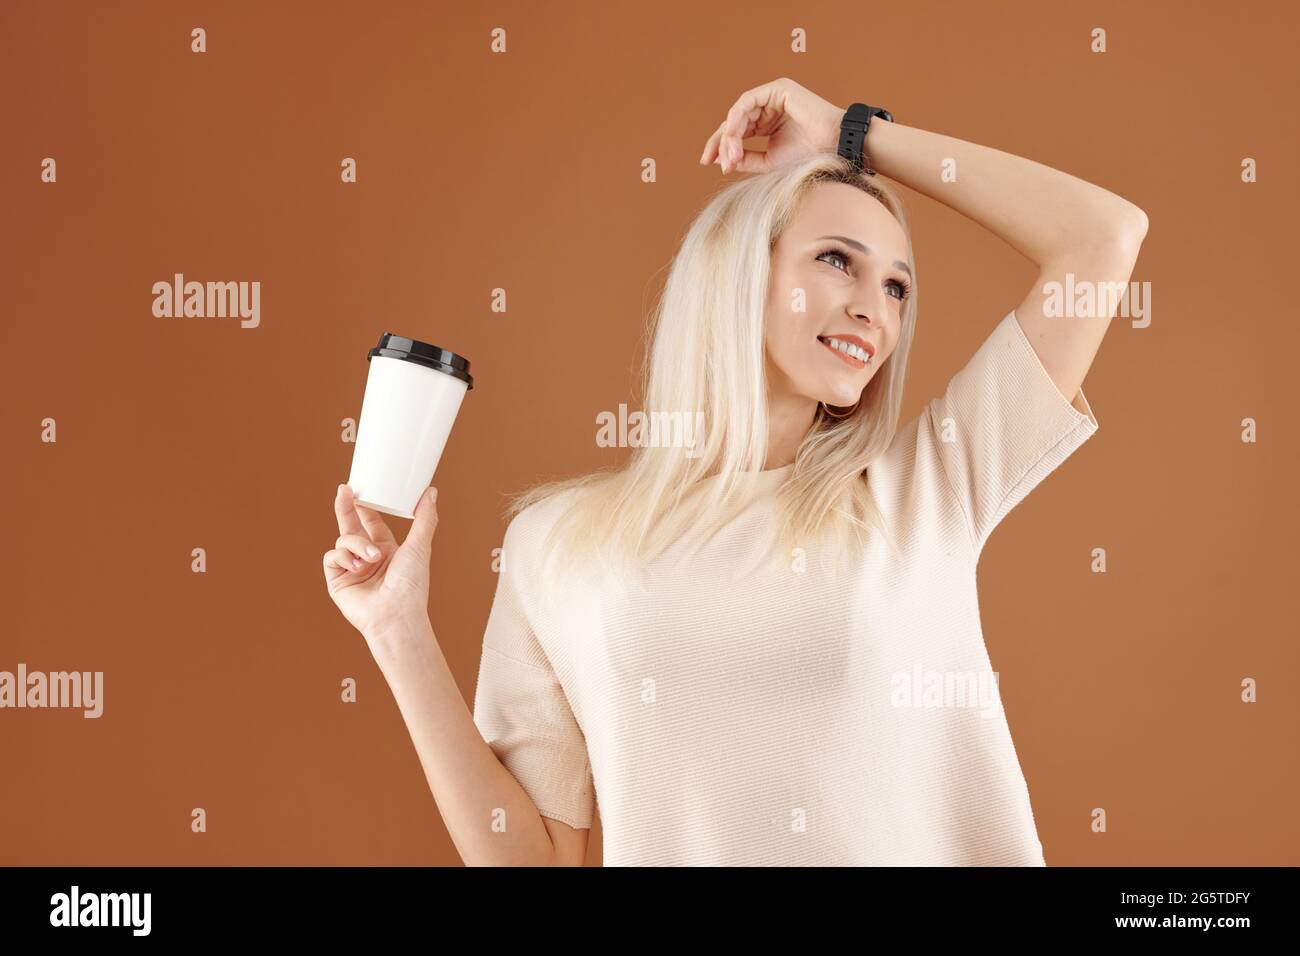 Happy carefree young blond-haired woman in wristwatch holding takeout coffee cup and holding hand on head while looking away Stock Photo